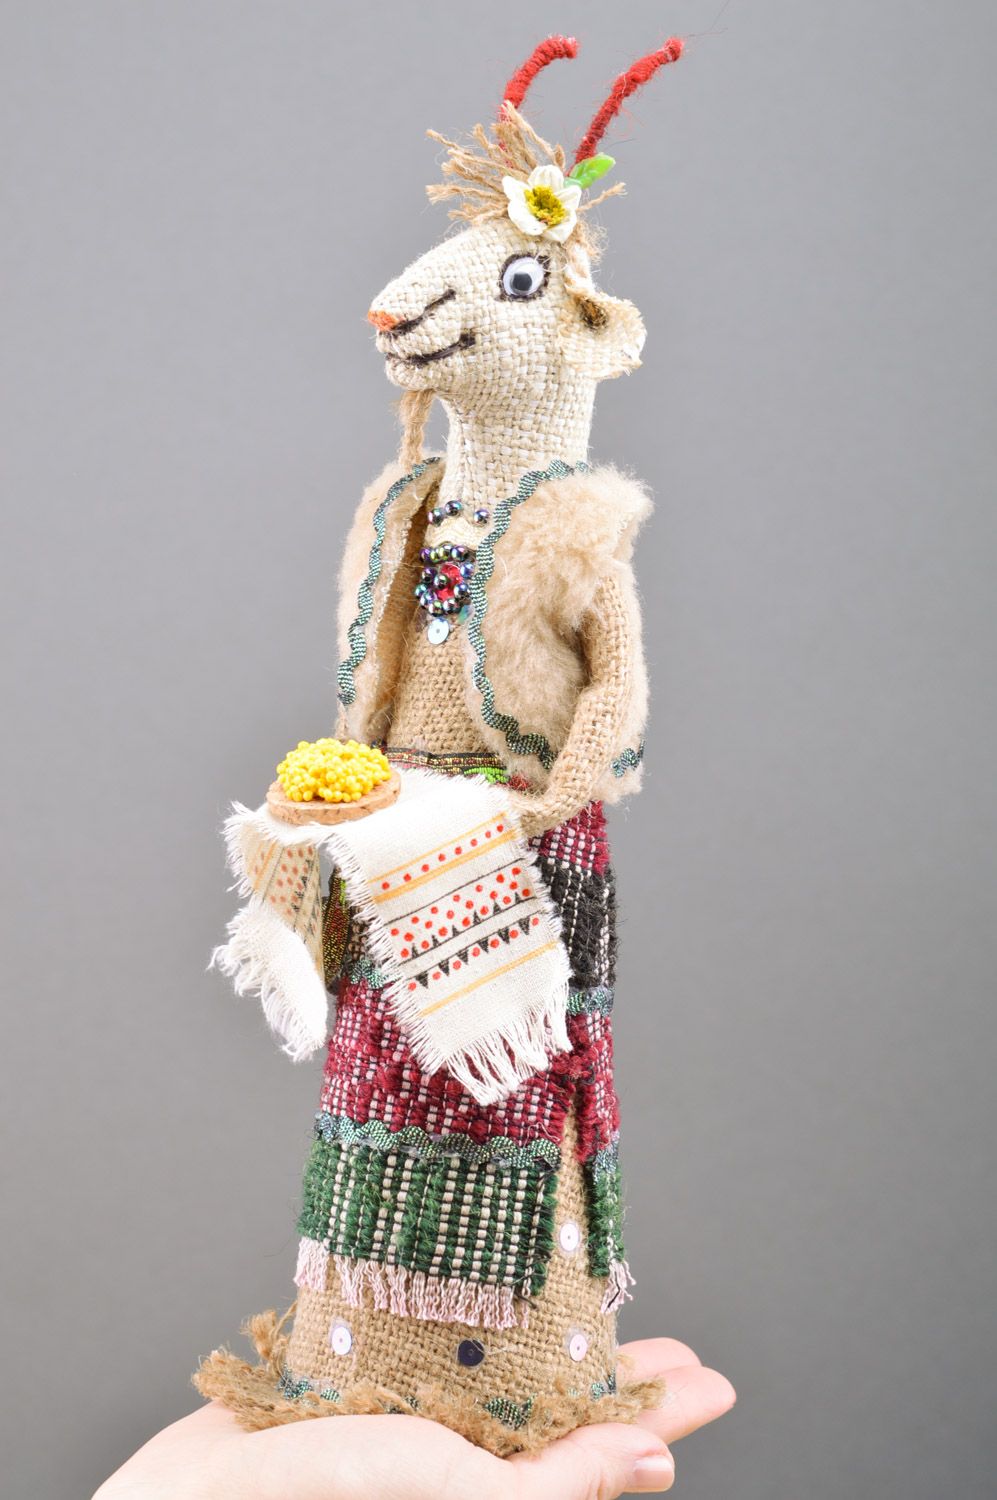 Handmade bottle cozy sewn of burlap Goat with Loaf on embroidered towel photo 1